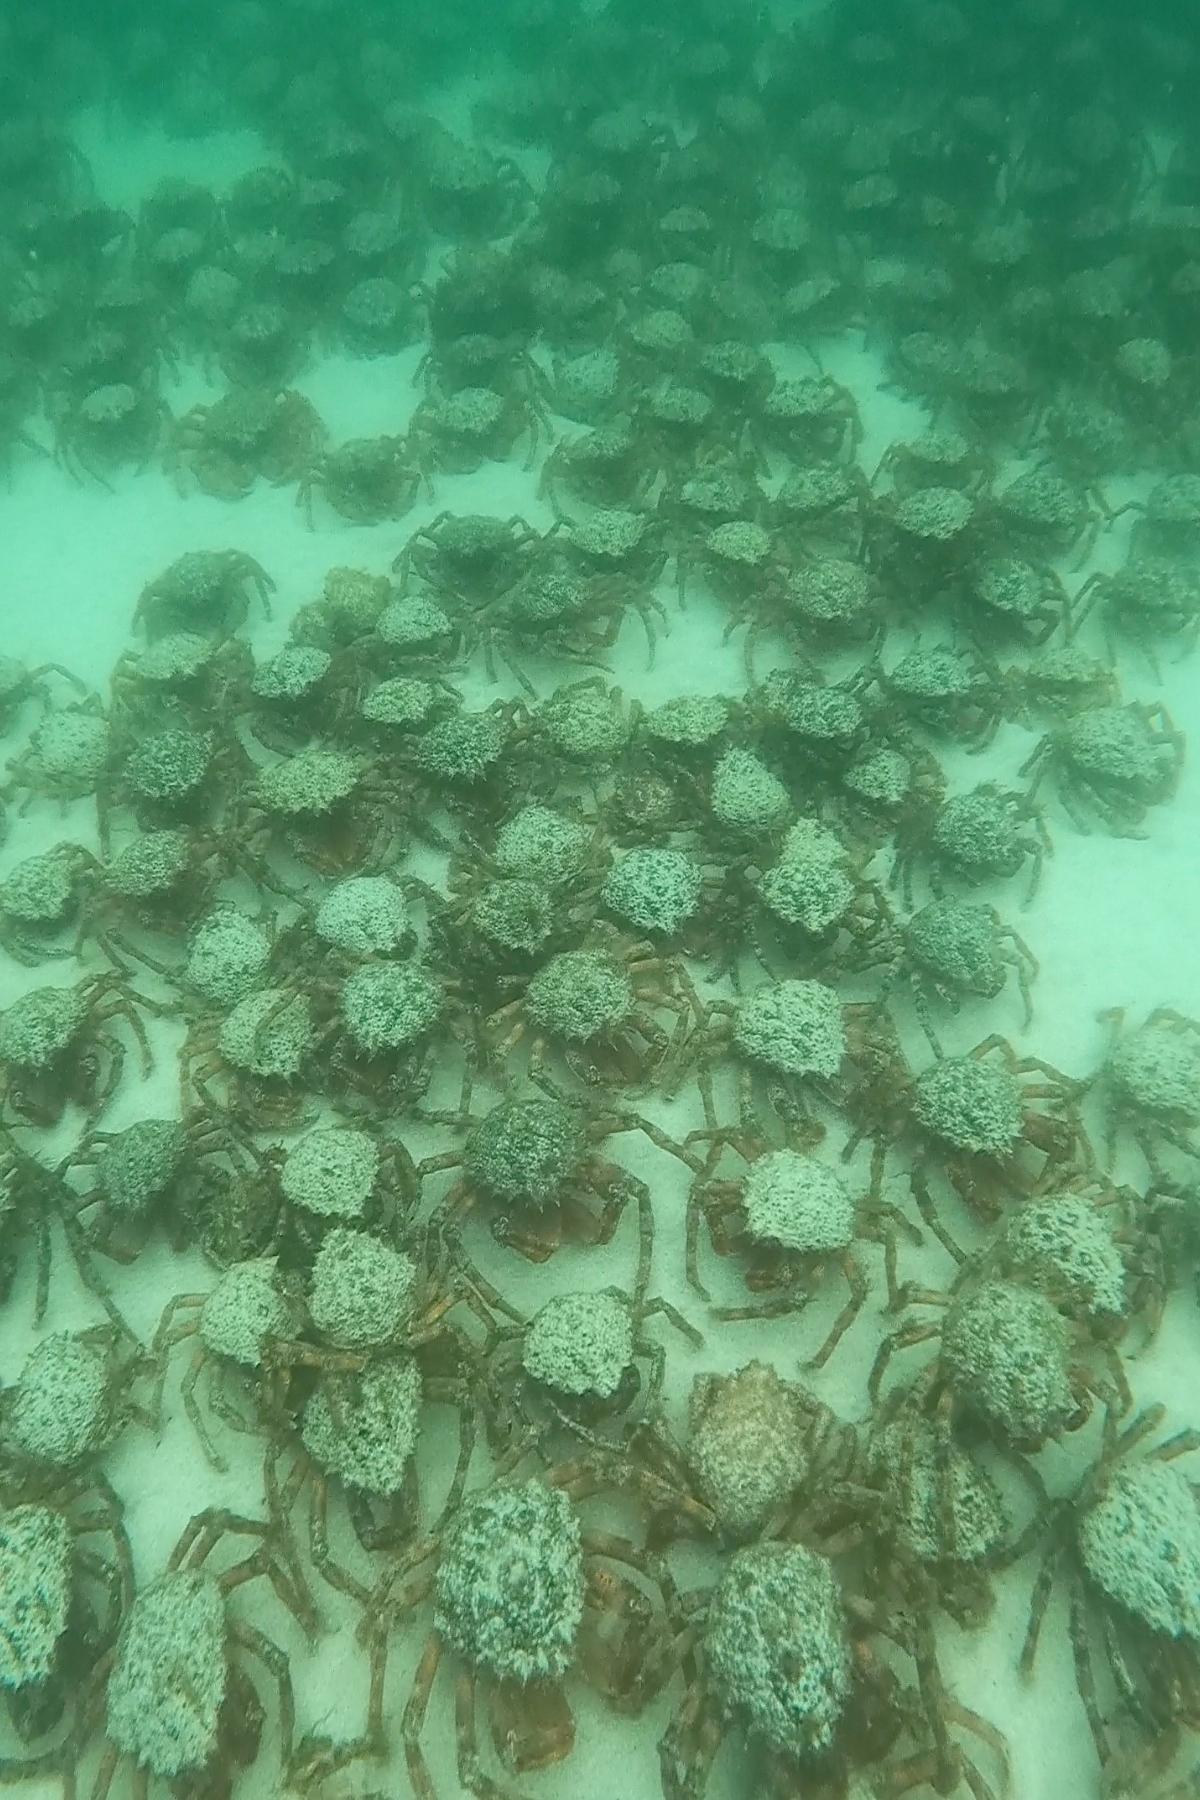 Giant spider crabs have been massing in multiple locations off Cornwall’s coast this summer (Katie Maggs/PA)